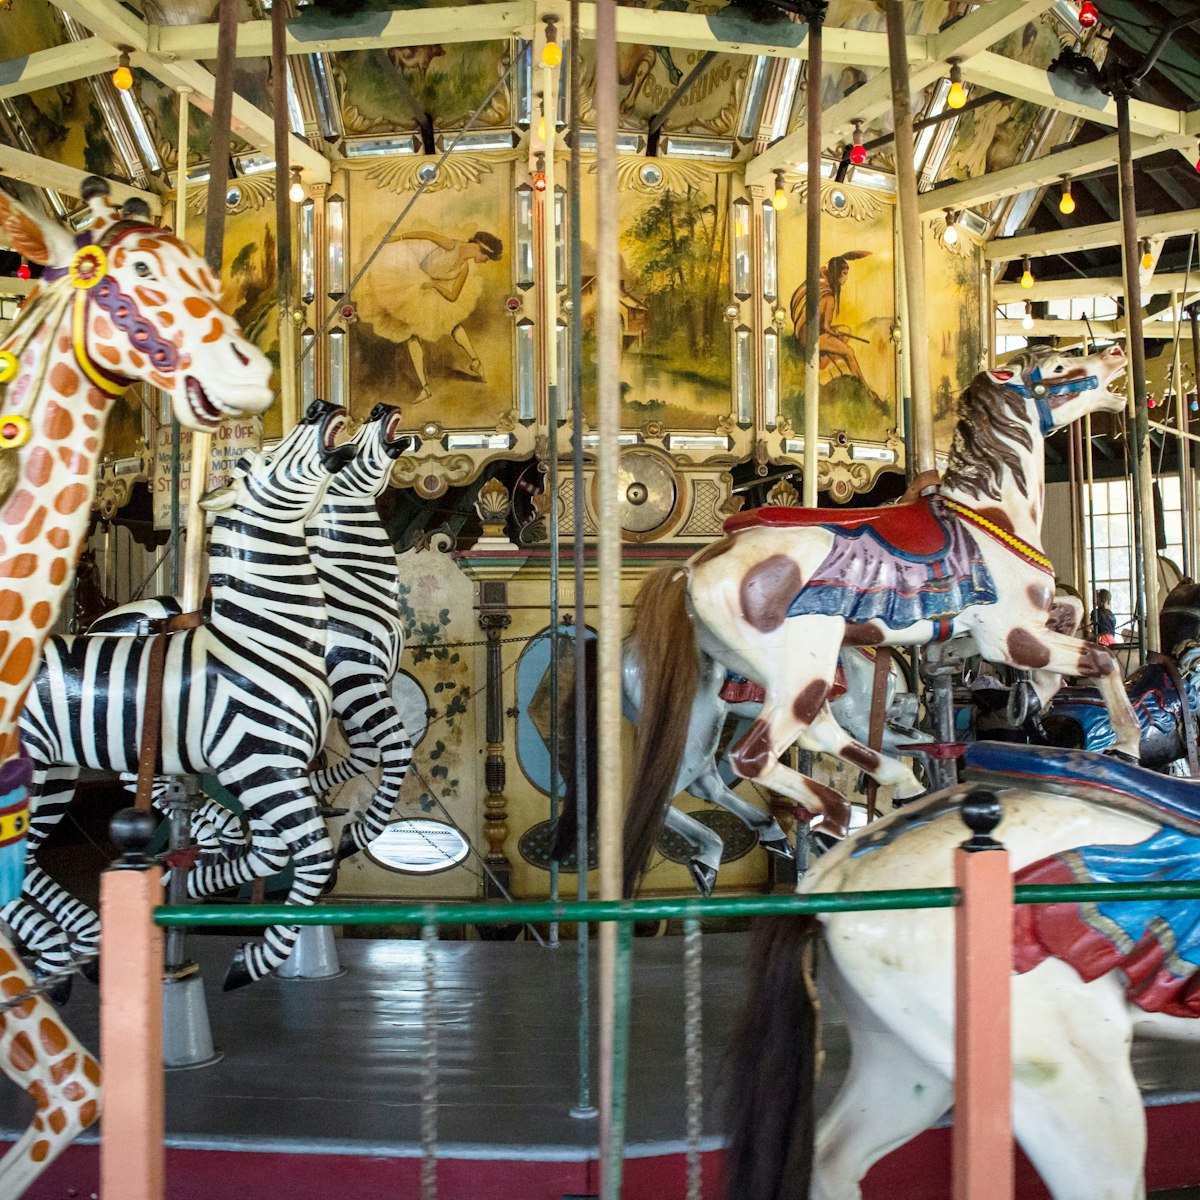 San Diego, California, USA – August 3, 2017: Horizontal view of the 1910 Balboa Park Carousel in motion ; Shutterstock ID 1365376670; your: Bridget Brown; gl: 65050; netsuite: Online Editorial; full: POI Image Update